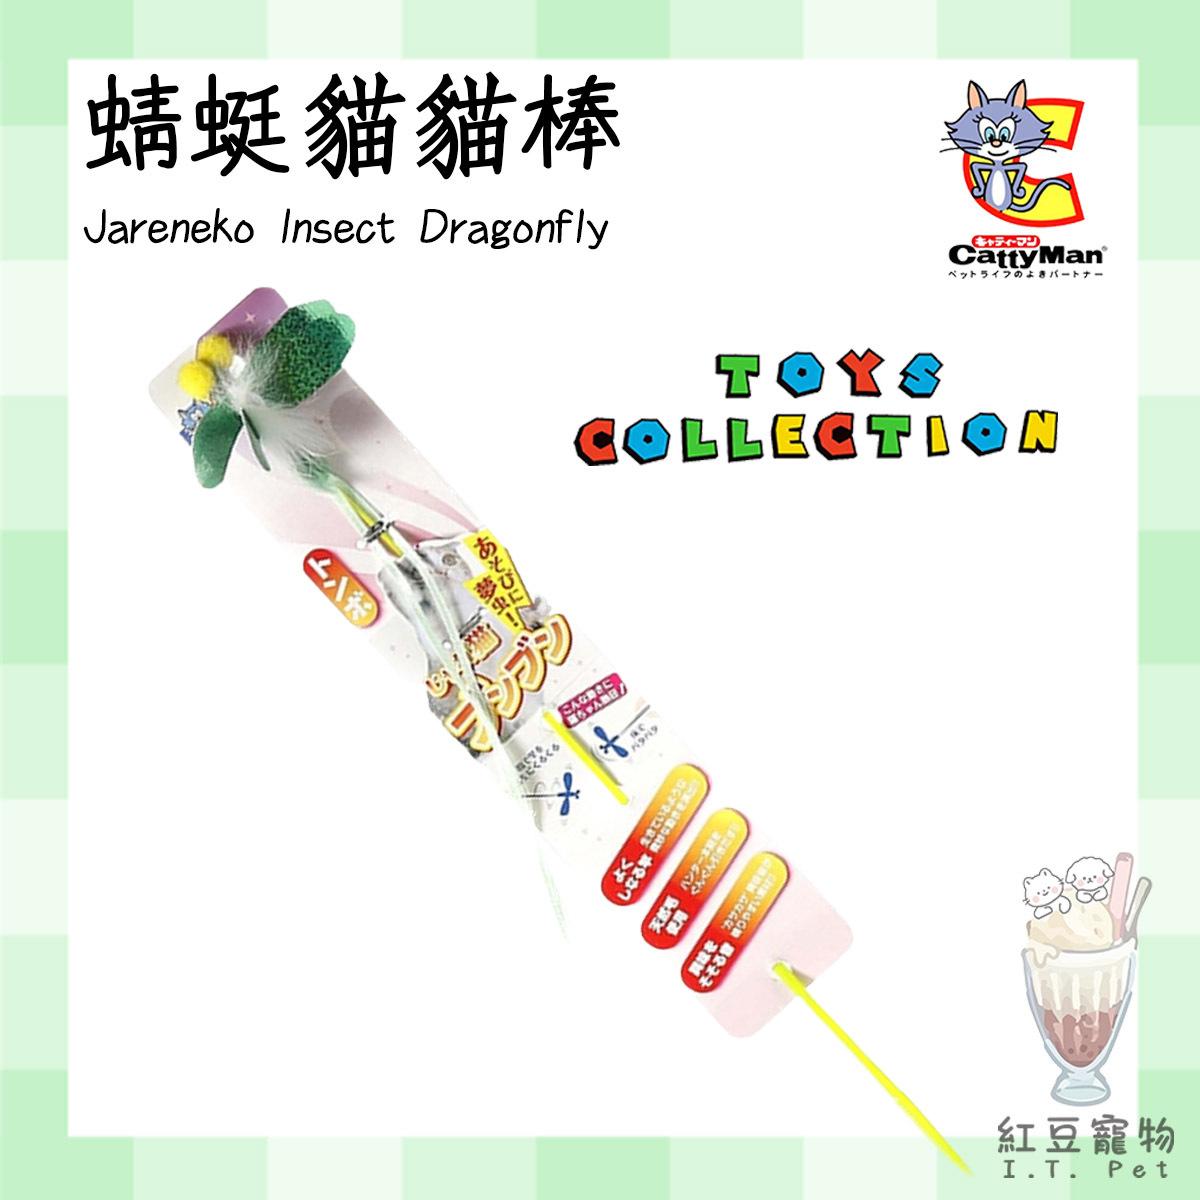 (Dragonfly) Jareneko Insect #Catty #toy